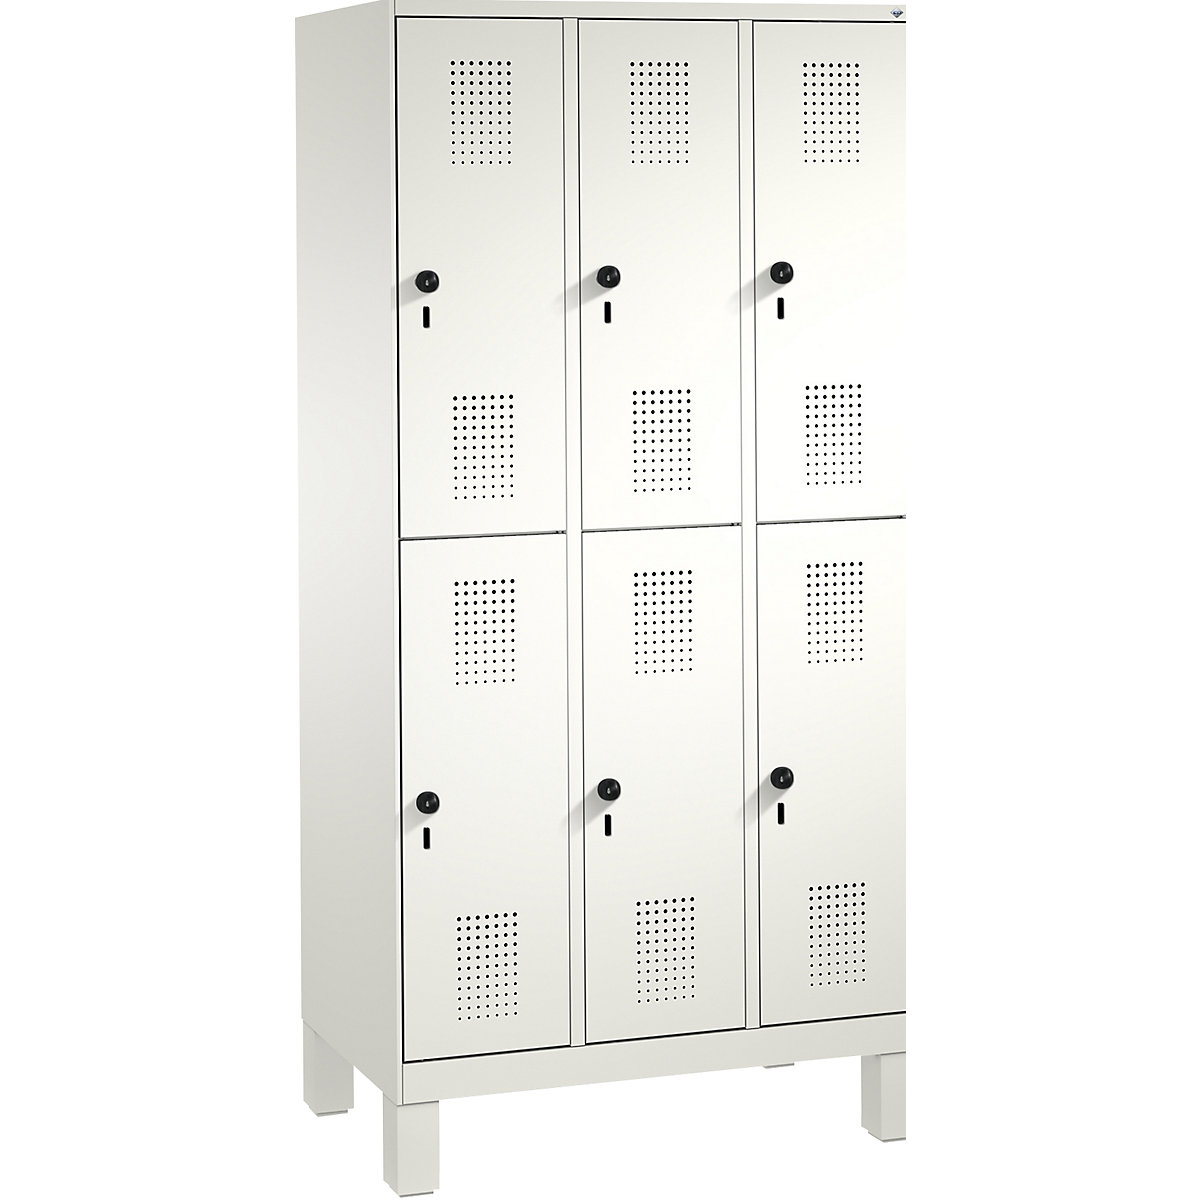 EVOLO cloakroom locker, double tier, with feet – C+P, 3 compartments, 2 shelf compartments each, compartment width 300 mm, traffic white / traffic white-6